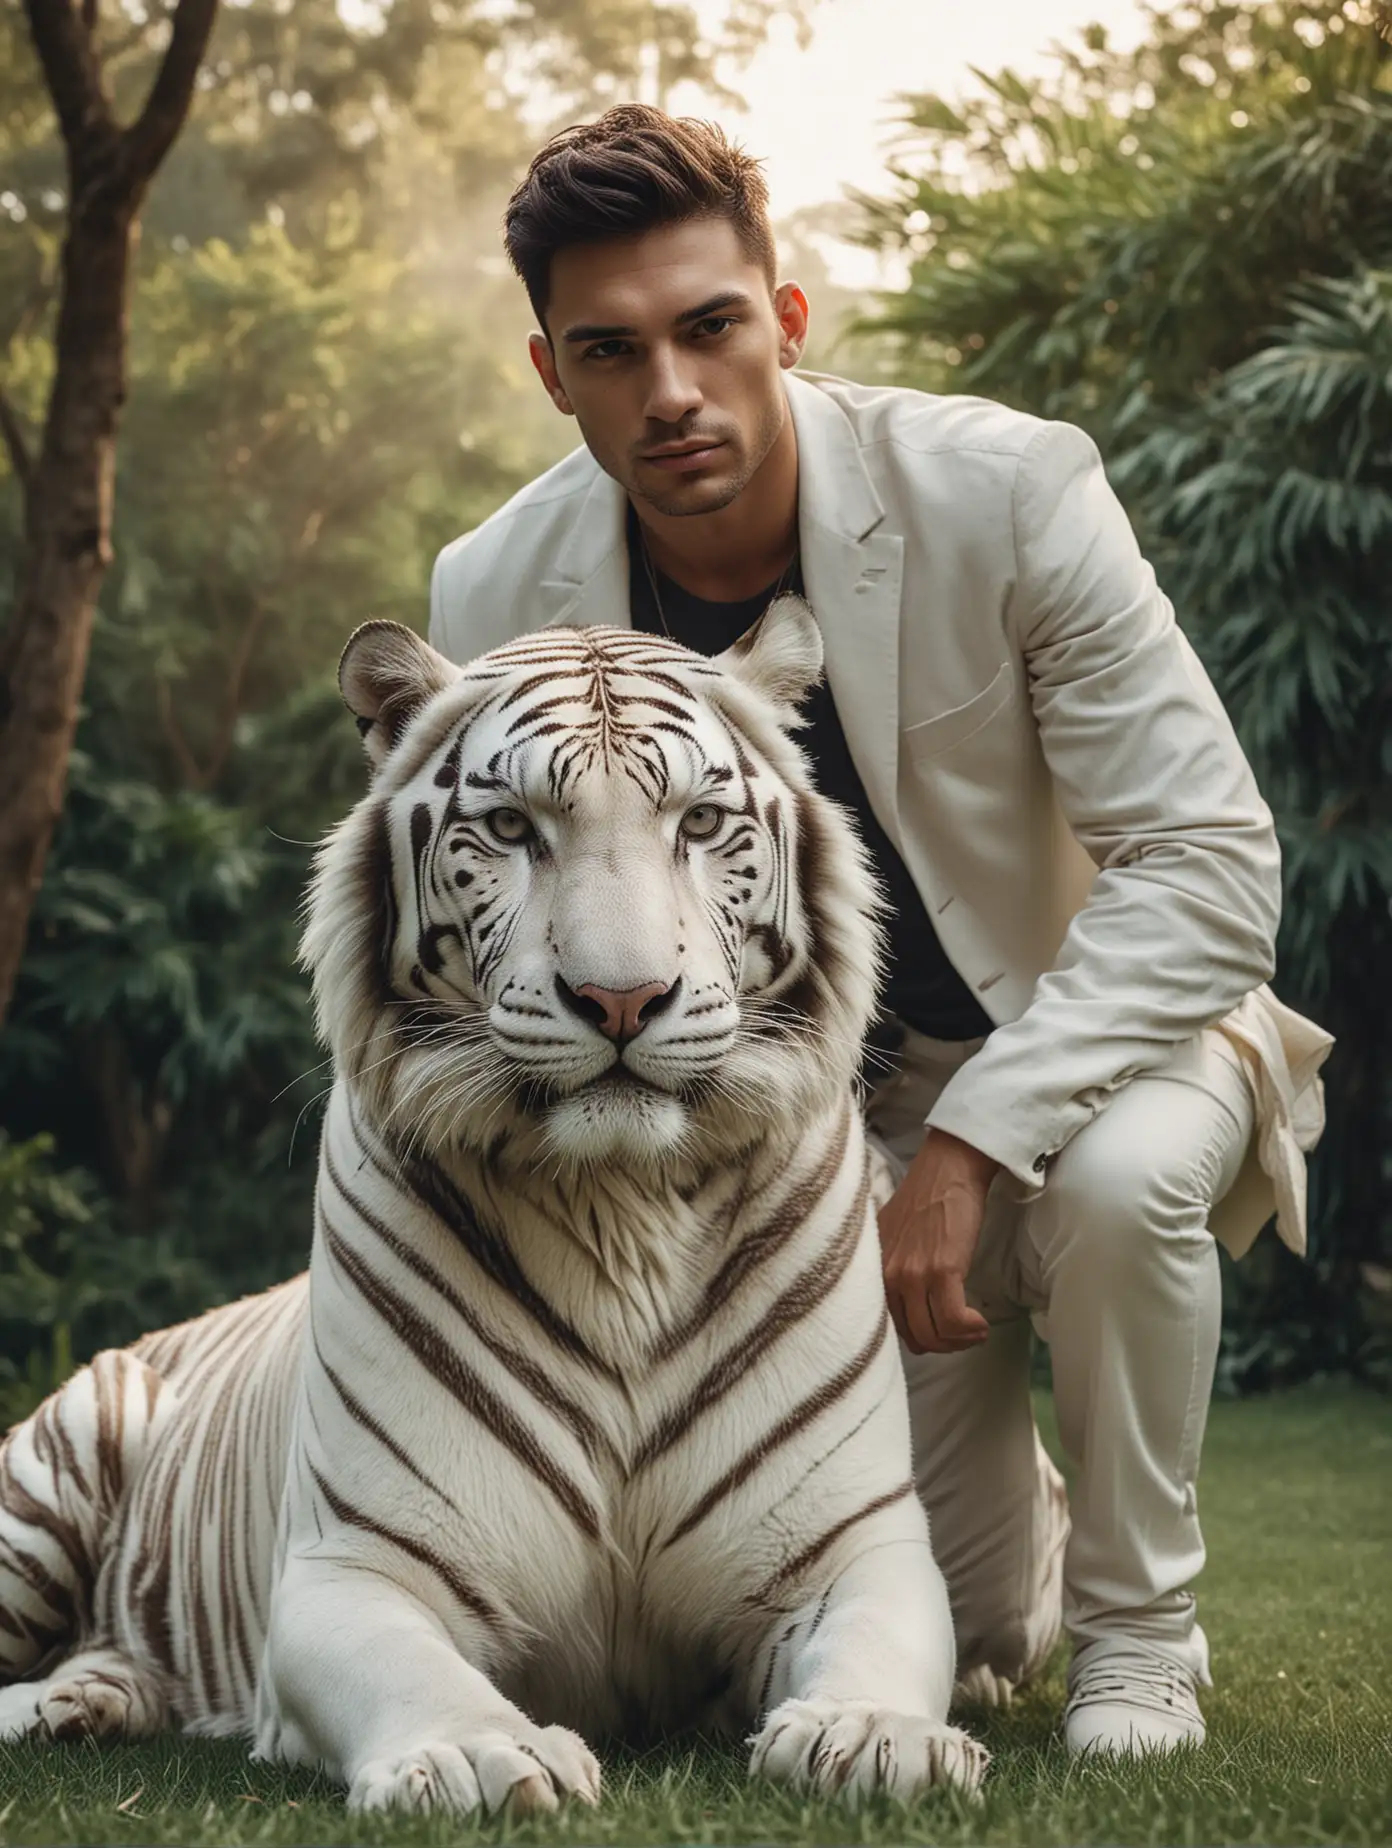 Photo of brazilian handsome guy posing with his pet white tiger on outdoor lawn, soft light style, cinematic style, portrait photo in surreal style, high resolution, natural color grading, no contrast, clean and clear focus.